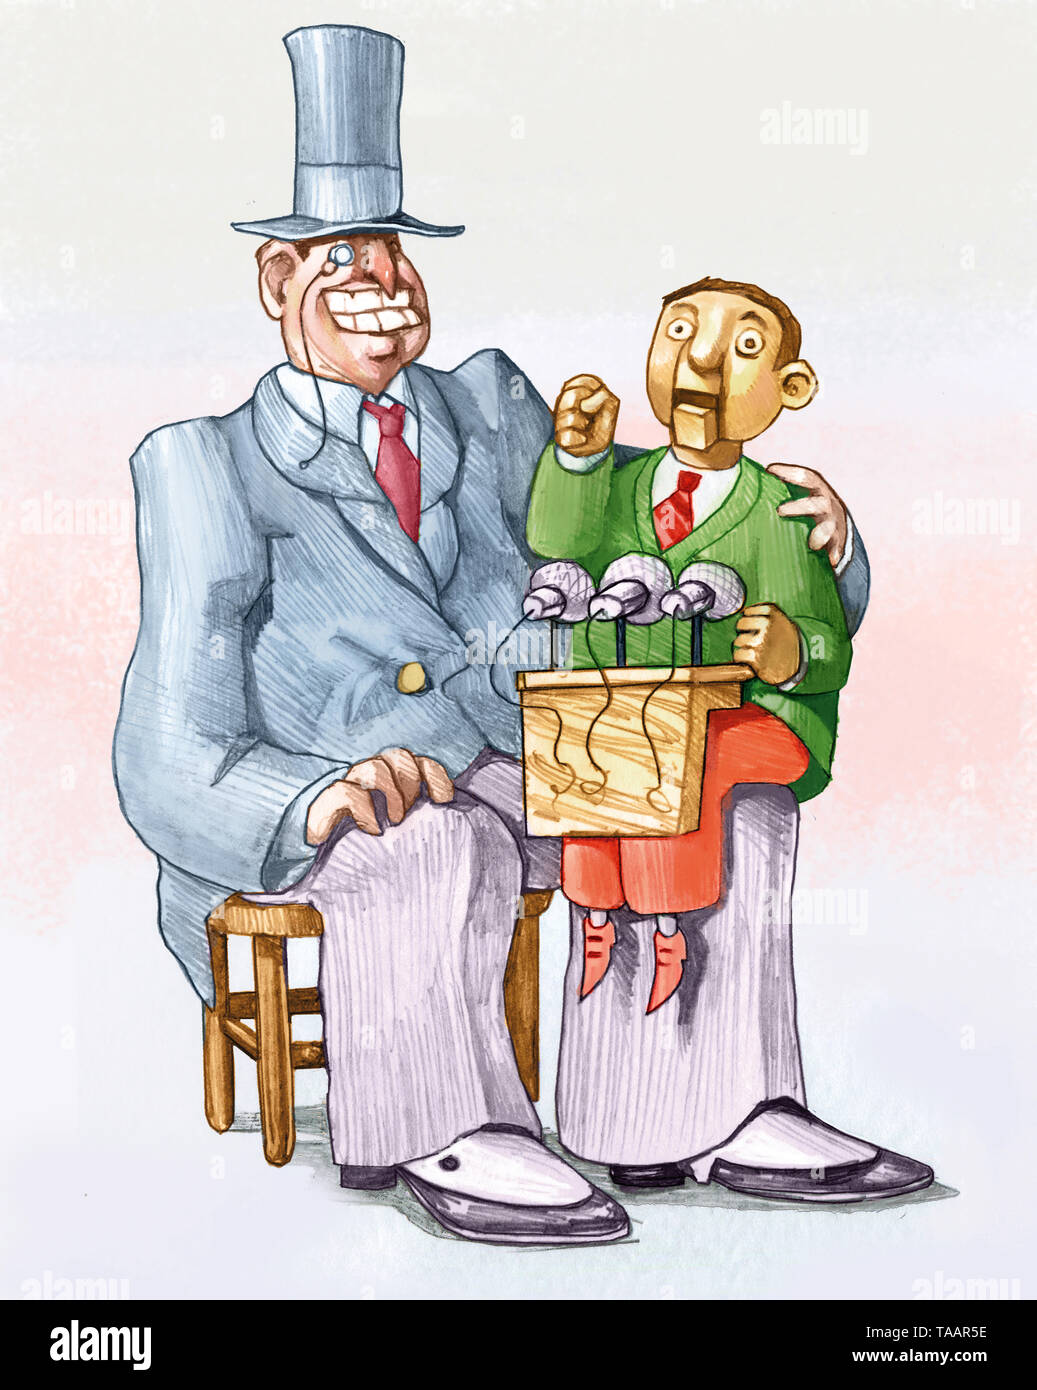 banker ventriloquist on his knees a political puppet allegory of the control of economic power over politics humorous political cartoon Stock Photo